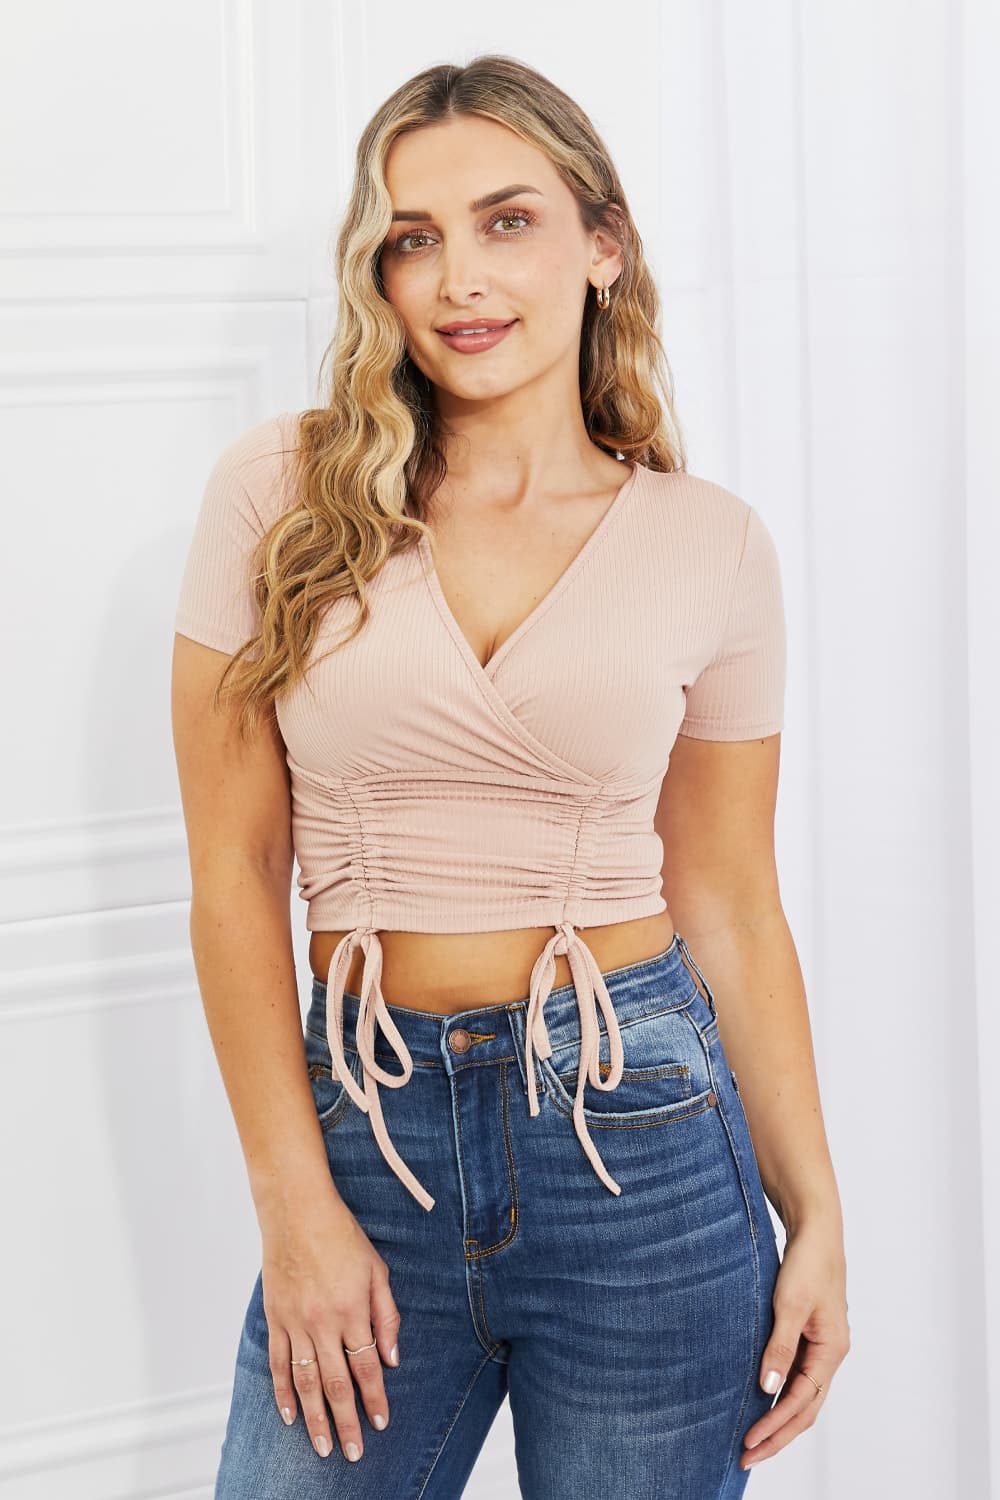 Malibu Dreams Capella Back To Simple Full Size Ribbed Front Scrunched Top in Blush